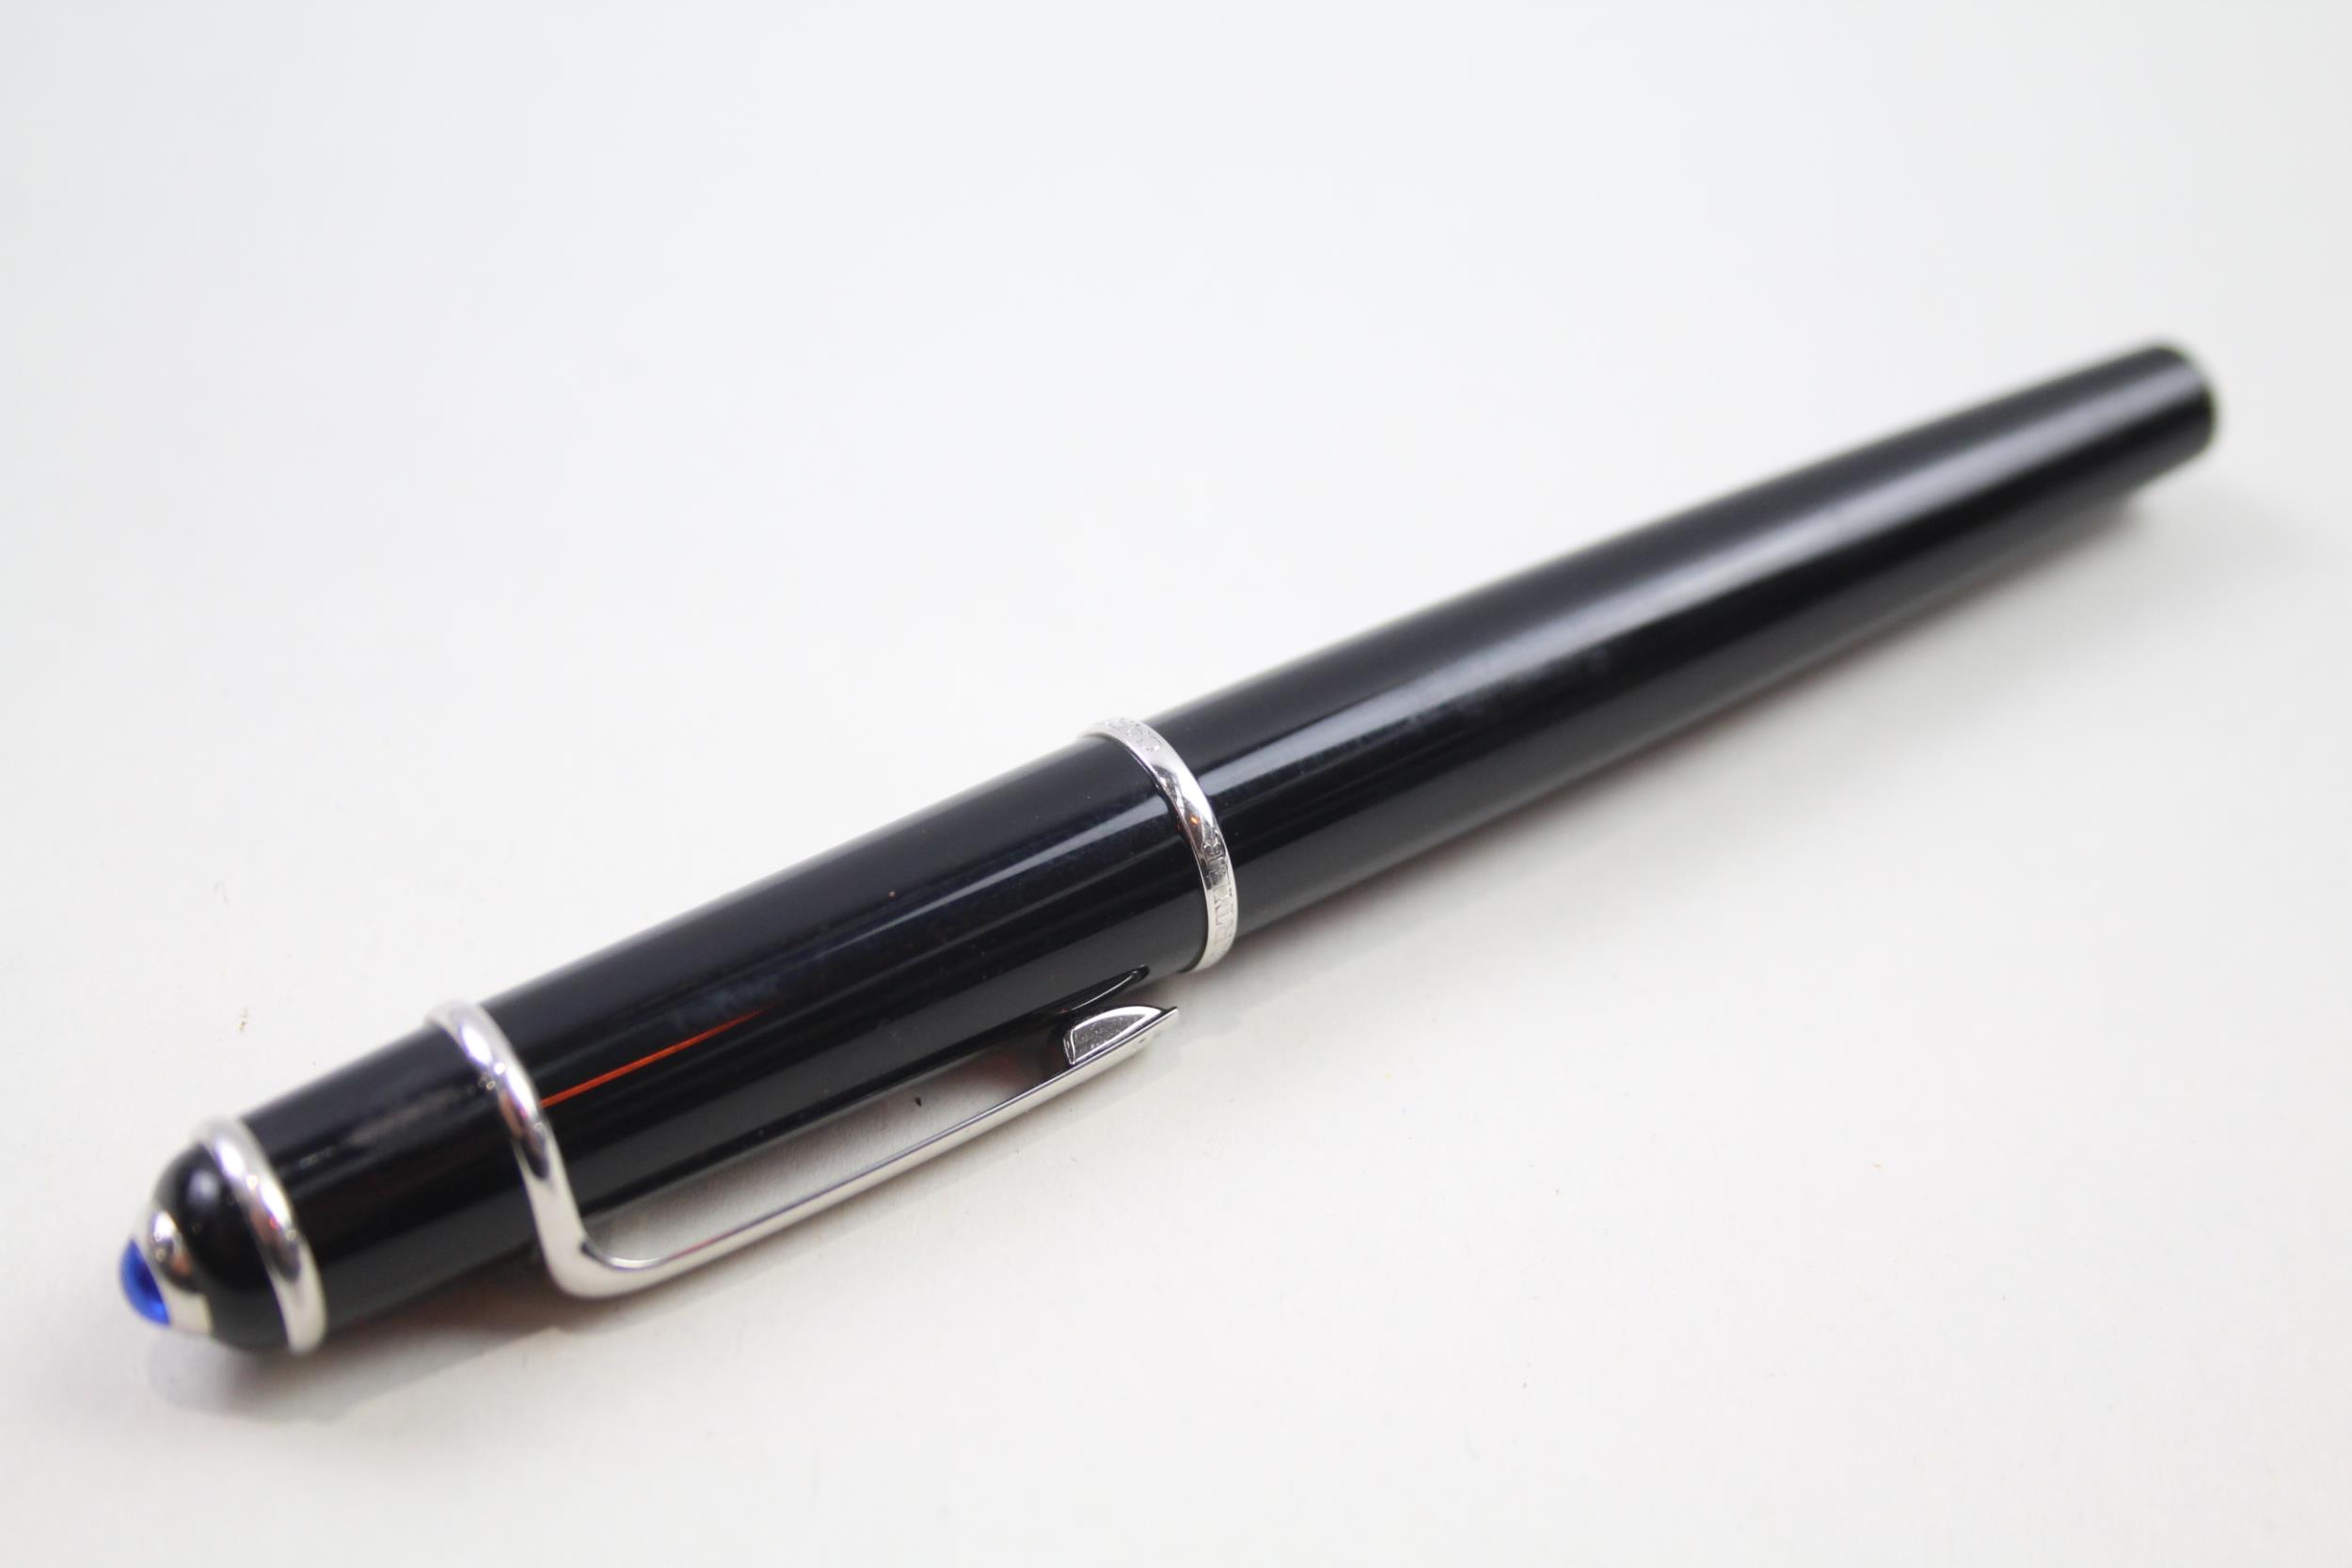 CARTIER Diabolo Black Cased Fountain Pen w/ 18ct White Gold Nib WRITING // Dip Tested & WRITING - Image 9 of 10